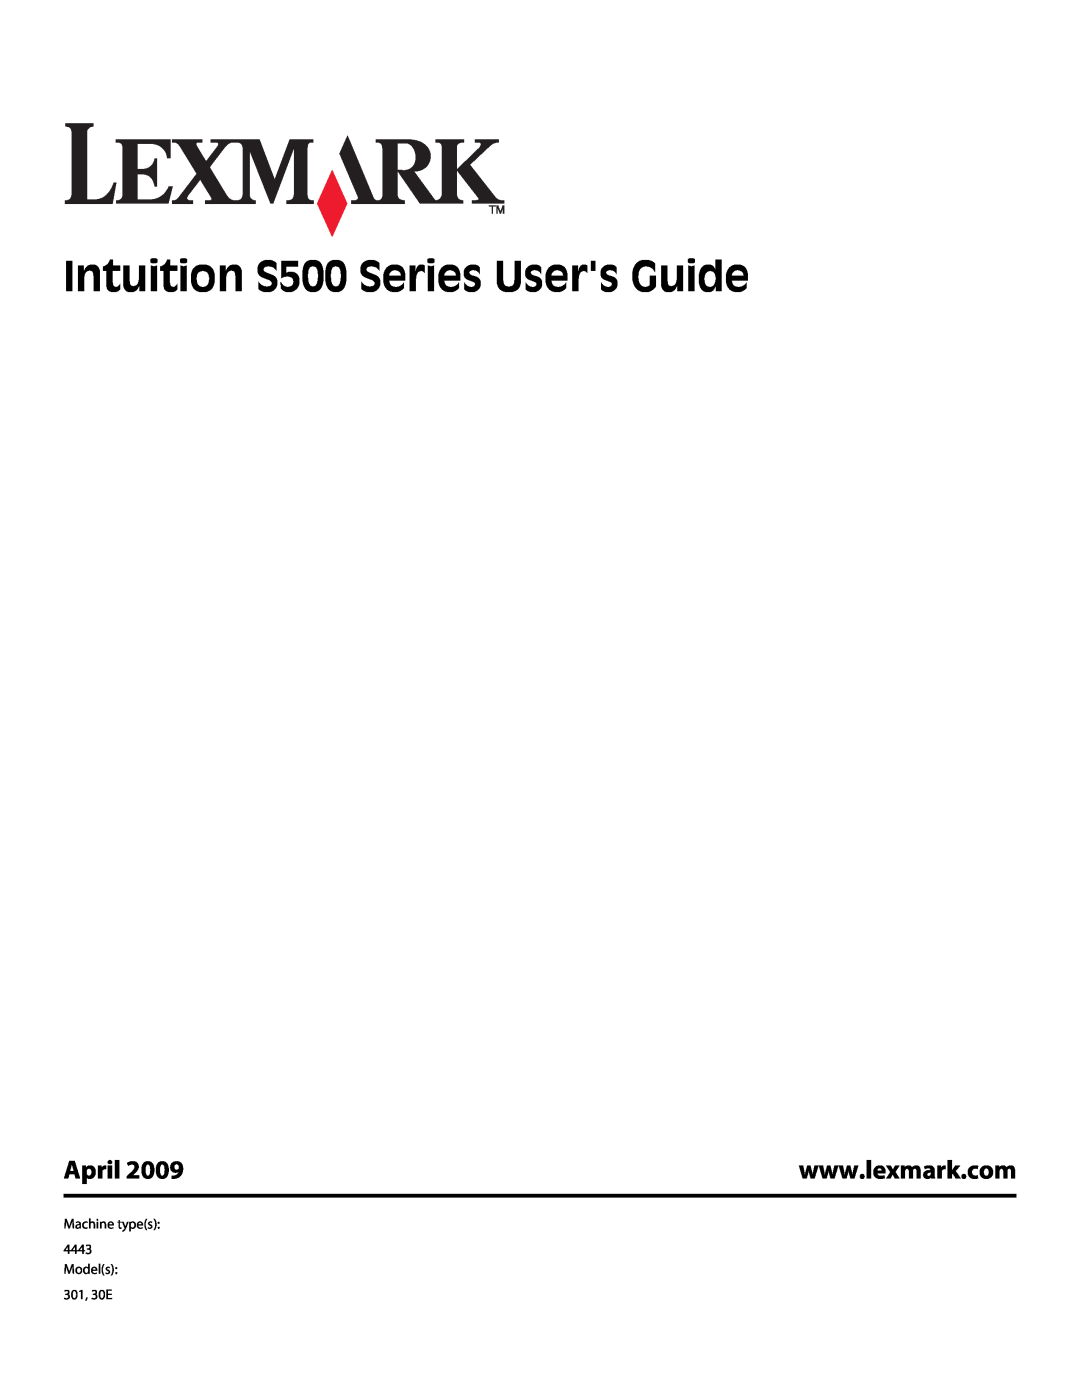 Lexmark 90T9105 manual Lexmark Pro900 Series Users Guide, Machine types 4444 Models 301, 30E 